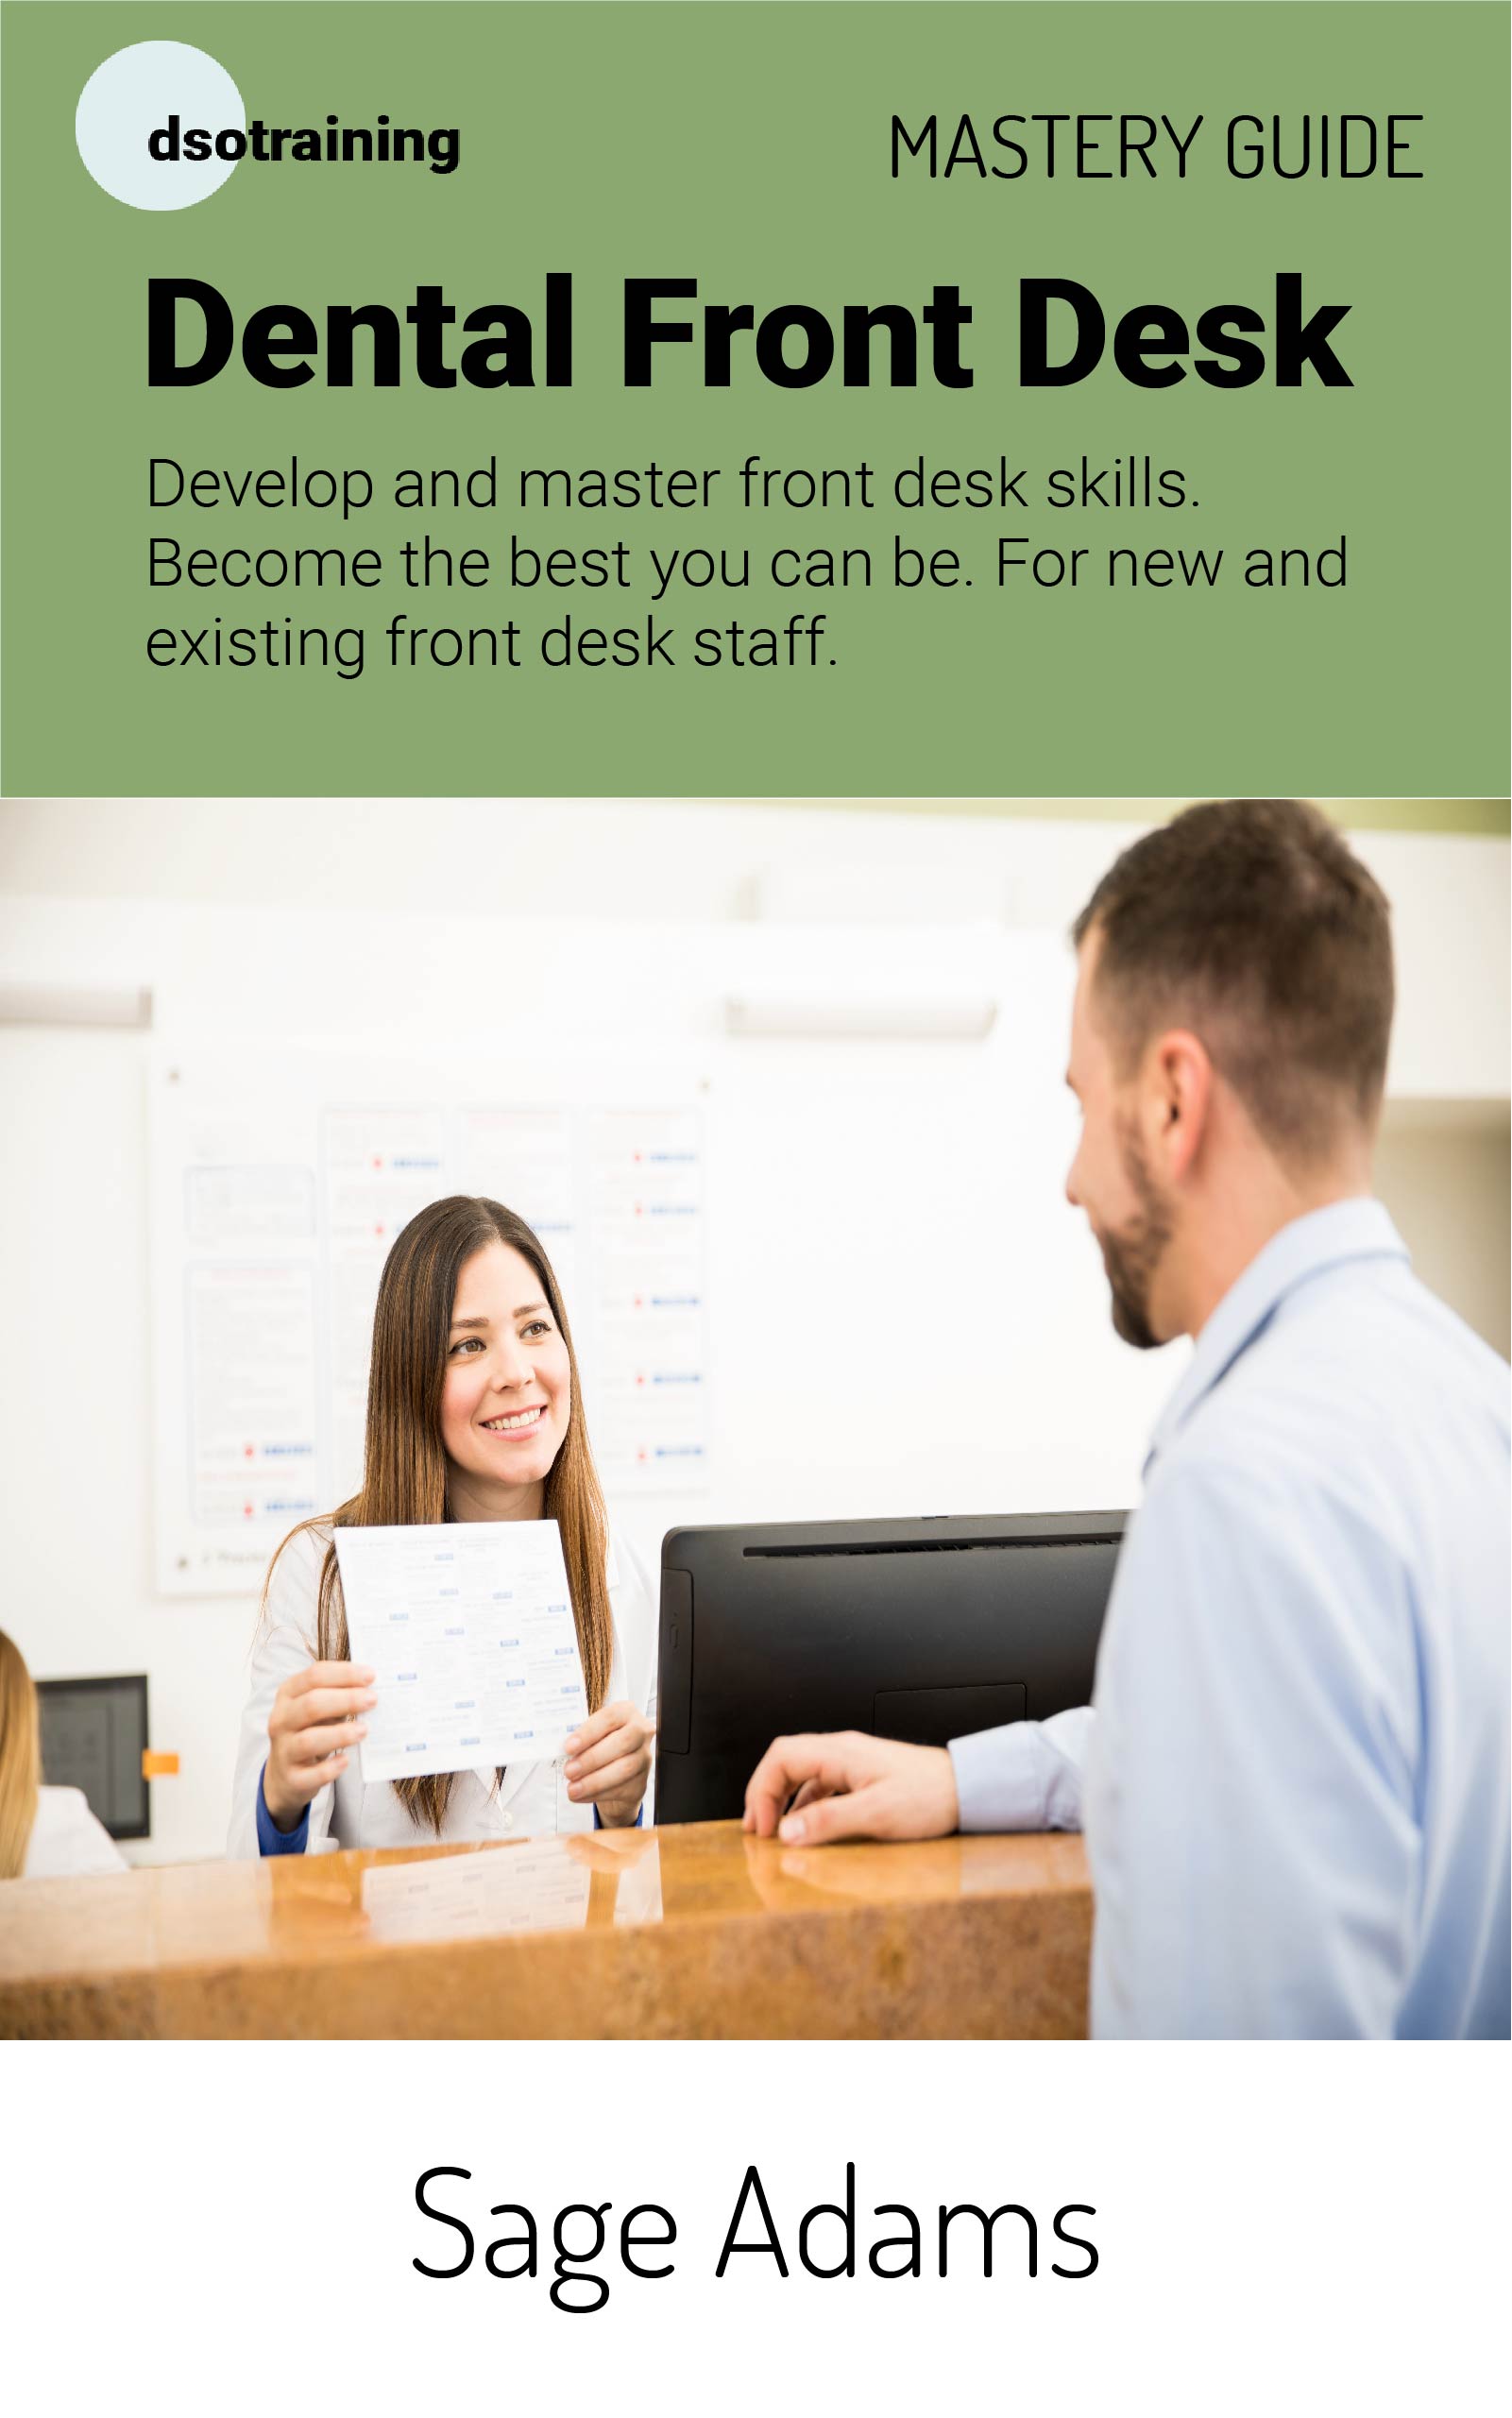 FREE: Mastery Guide: Dental Front Desk Mentoring by Sage Adams